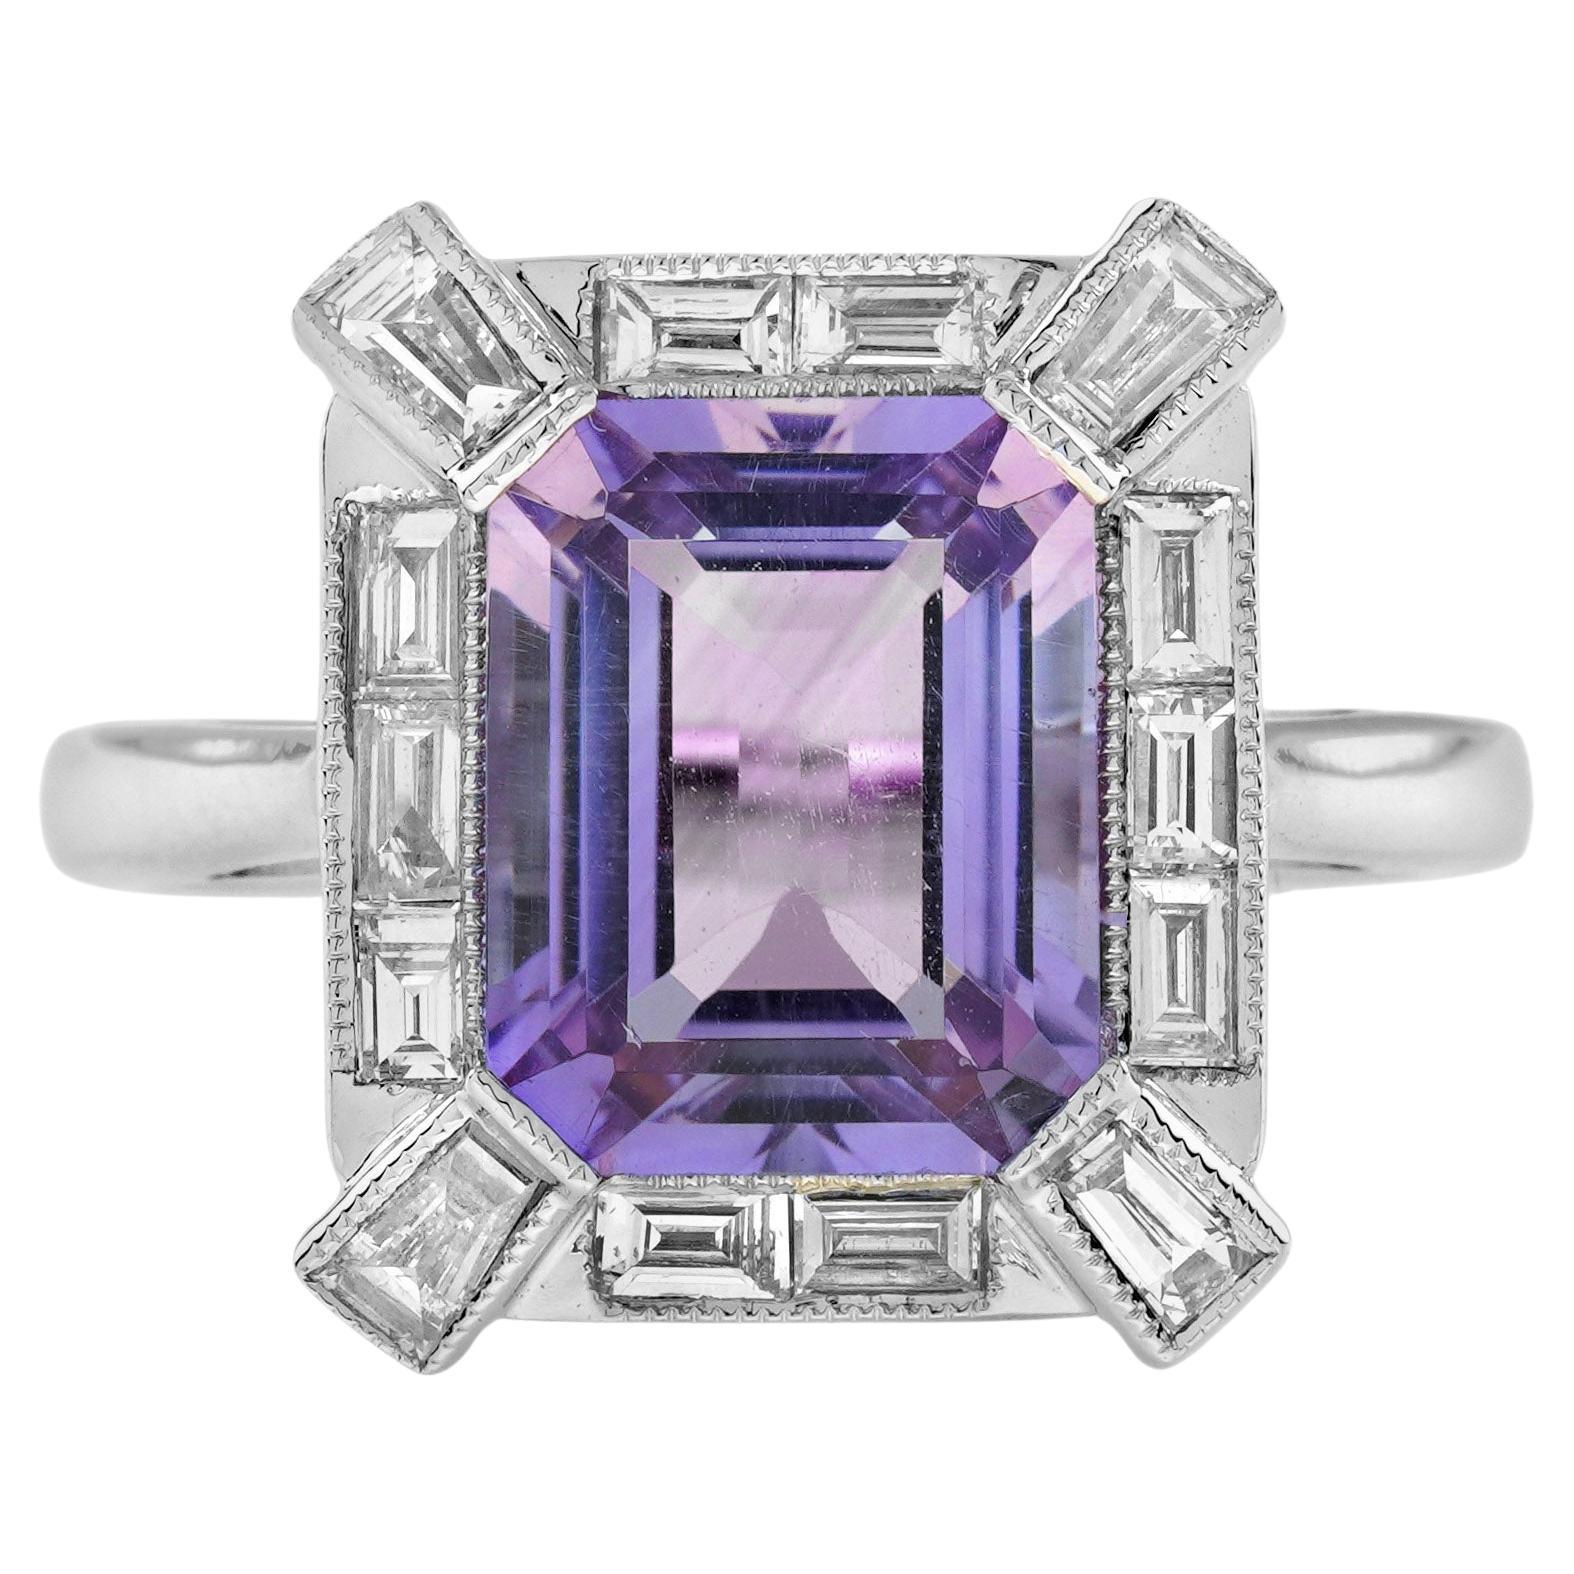 Emerald Cut Pink Amethyst and Diamond Halo Art Deco Style Ring in 14K White Gold For Sale